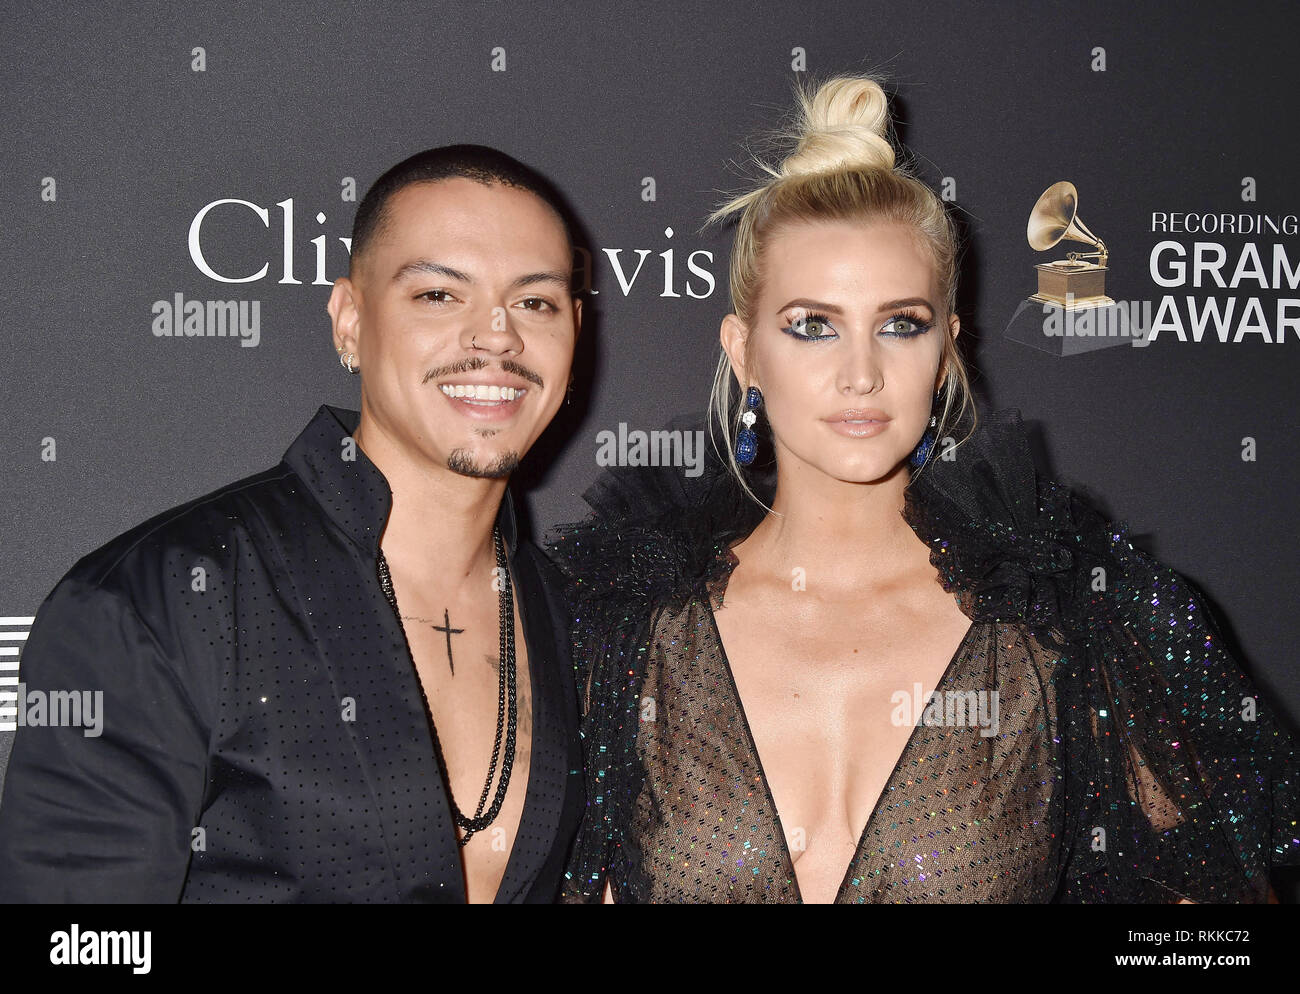 BEVERLY HILLS, CA - FEBRUARY 09: Evan Ross (L) and Ashlee Simpson attend The Recording Academy And Clive Davis' 2019 Pre-GRAMMY Gala at The Beverly Hi Stock Photo